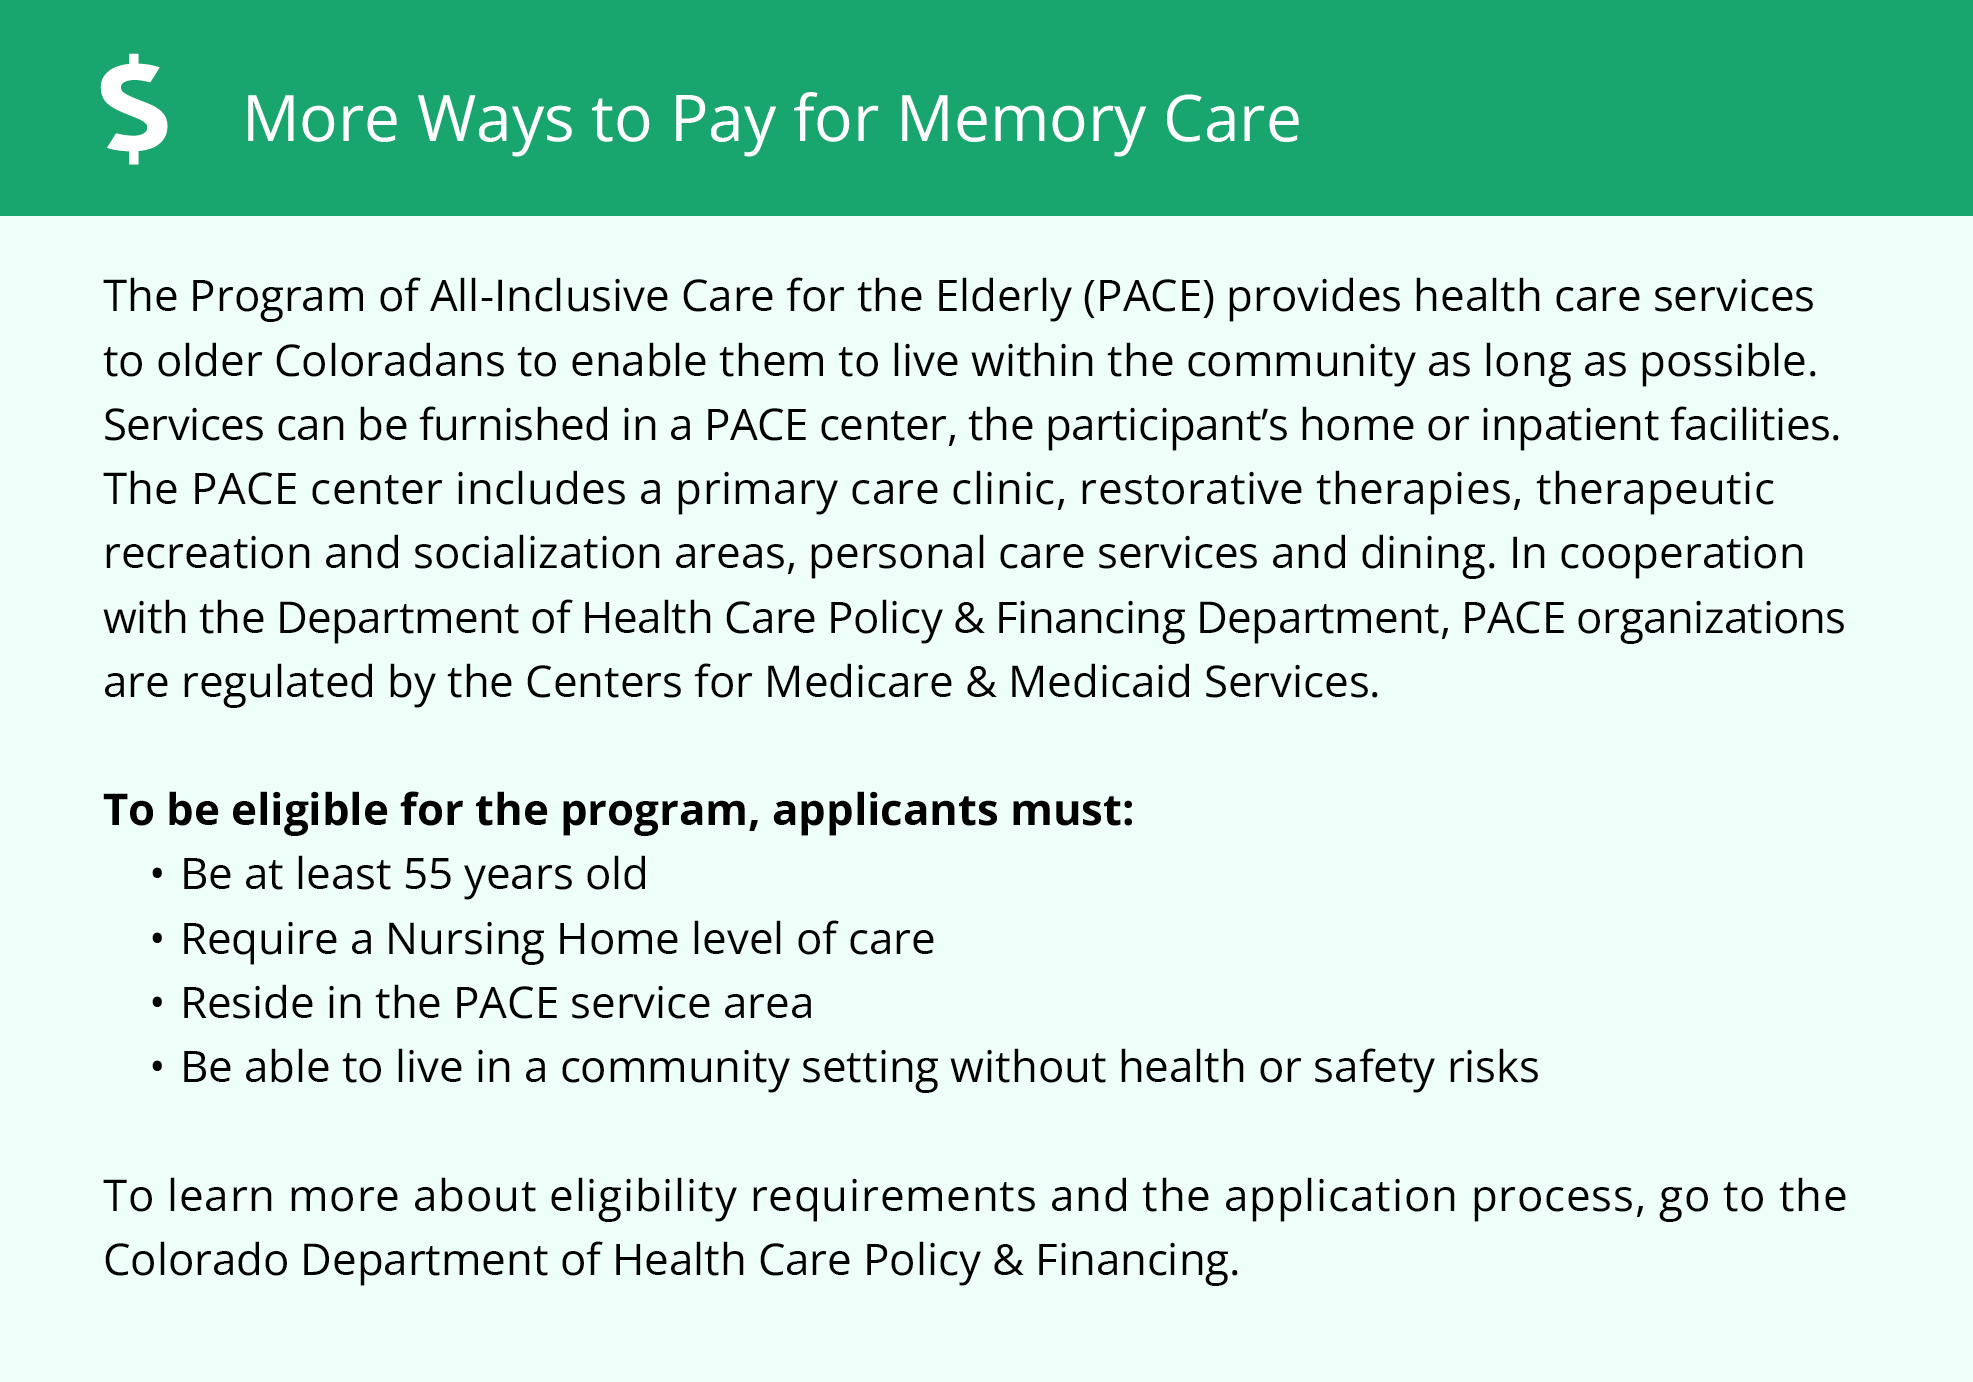 Financial Assistance for Memory Care in Colorado